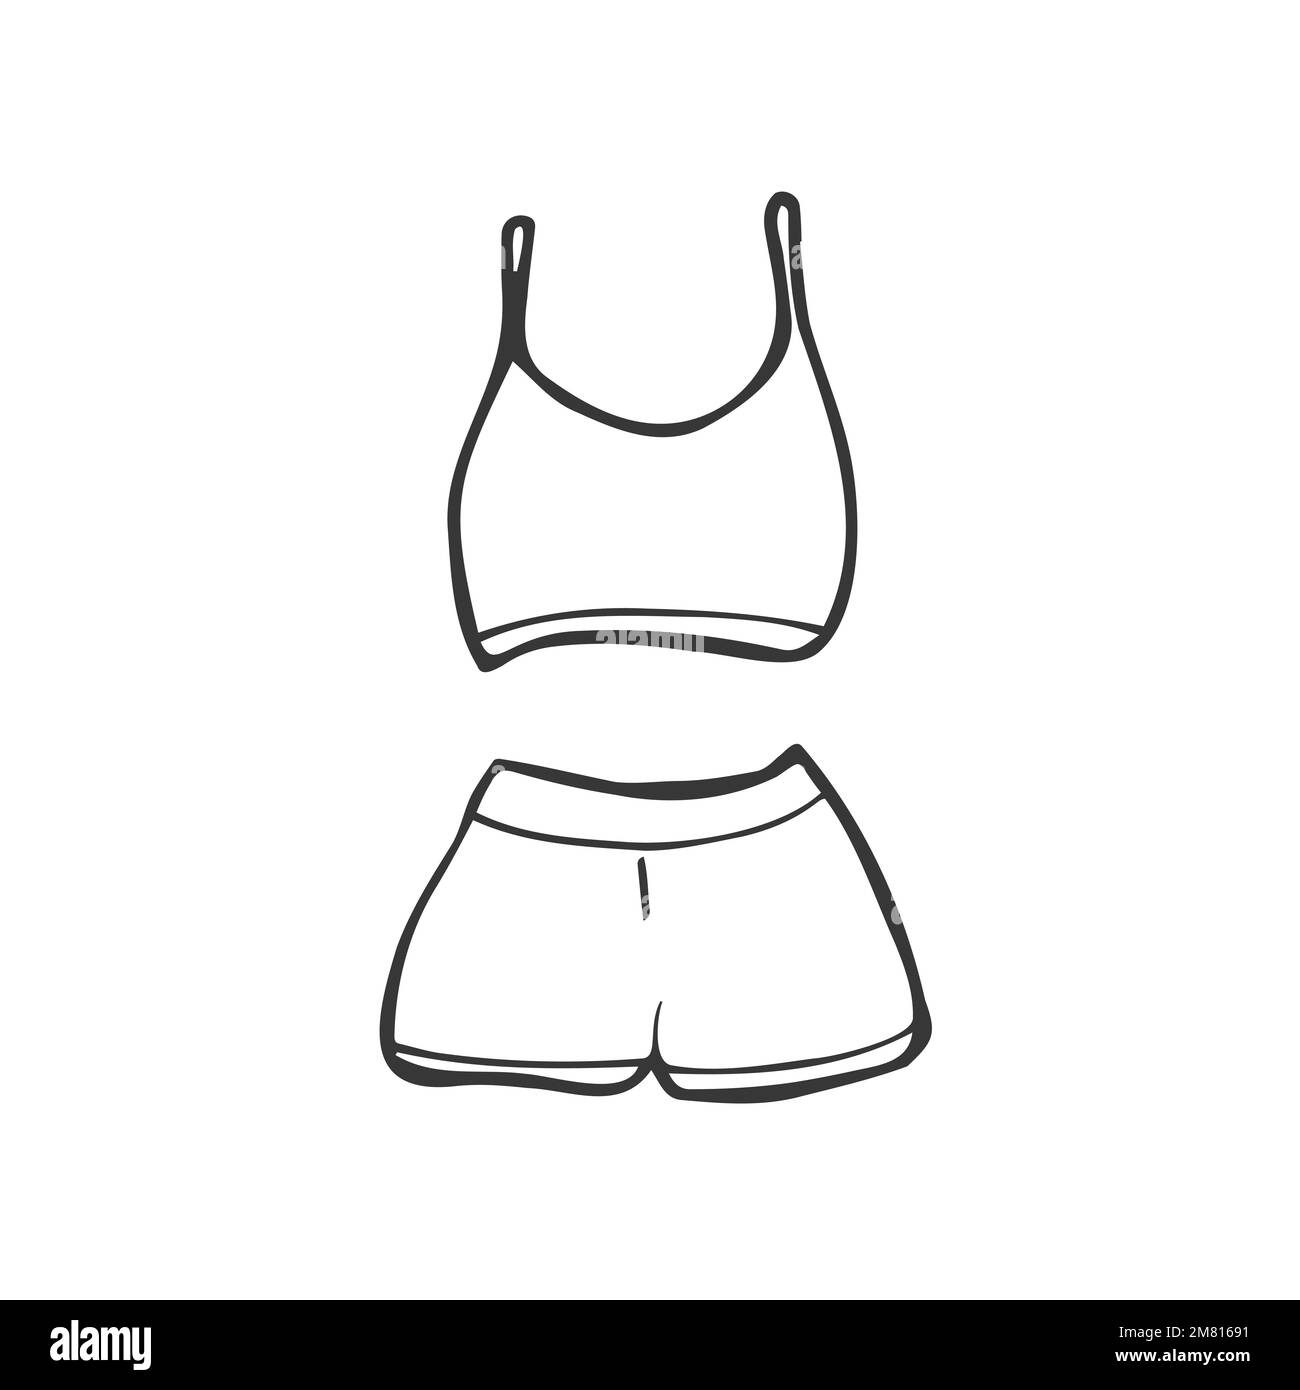 Women's fitness outfit. Bra top, shorts. For sports activities. Vector illustration hand-drawn. Stock Vector